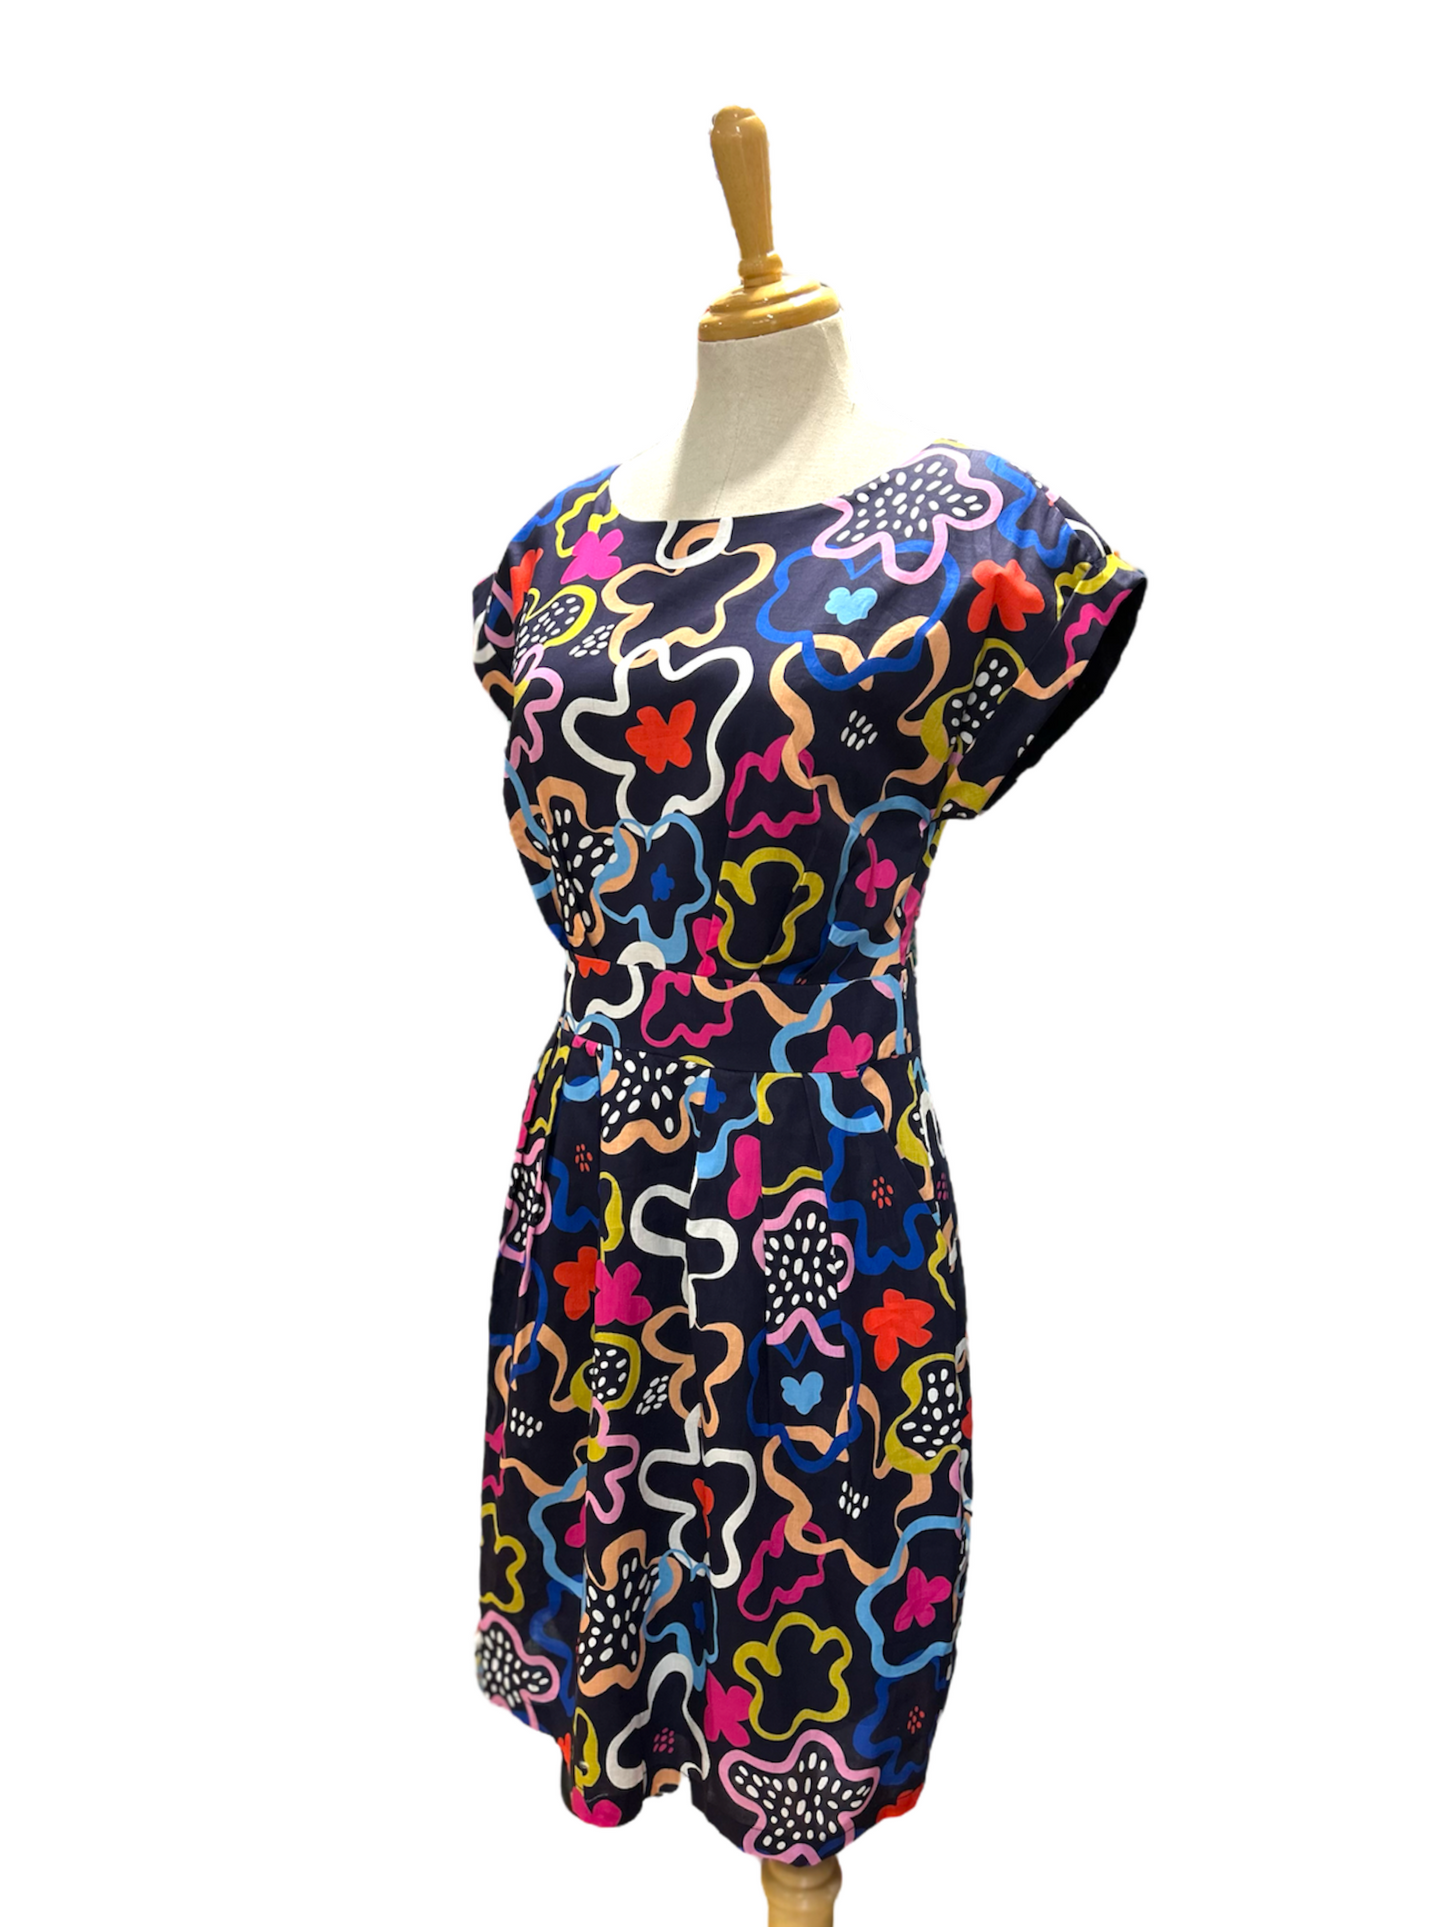 A Walk in the Park Dress - Abstract flower pattern